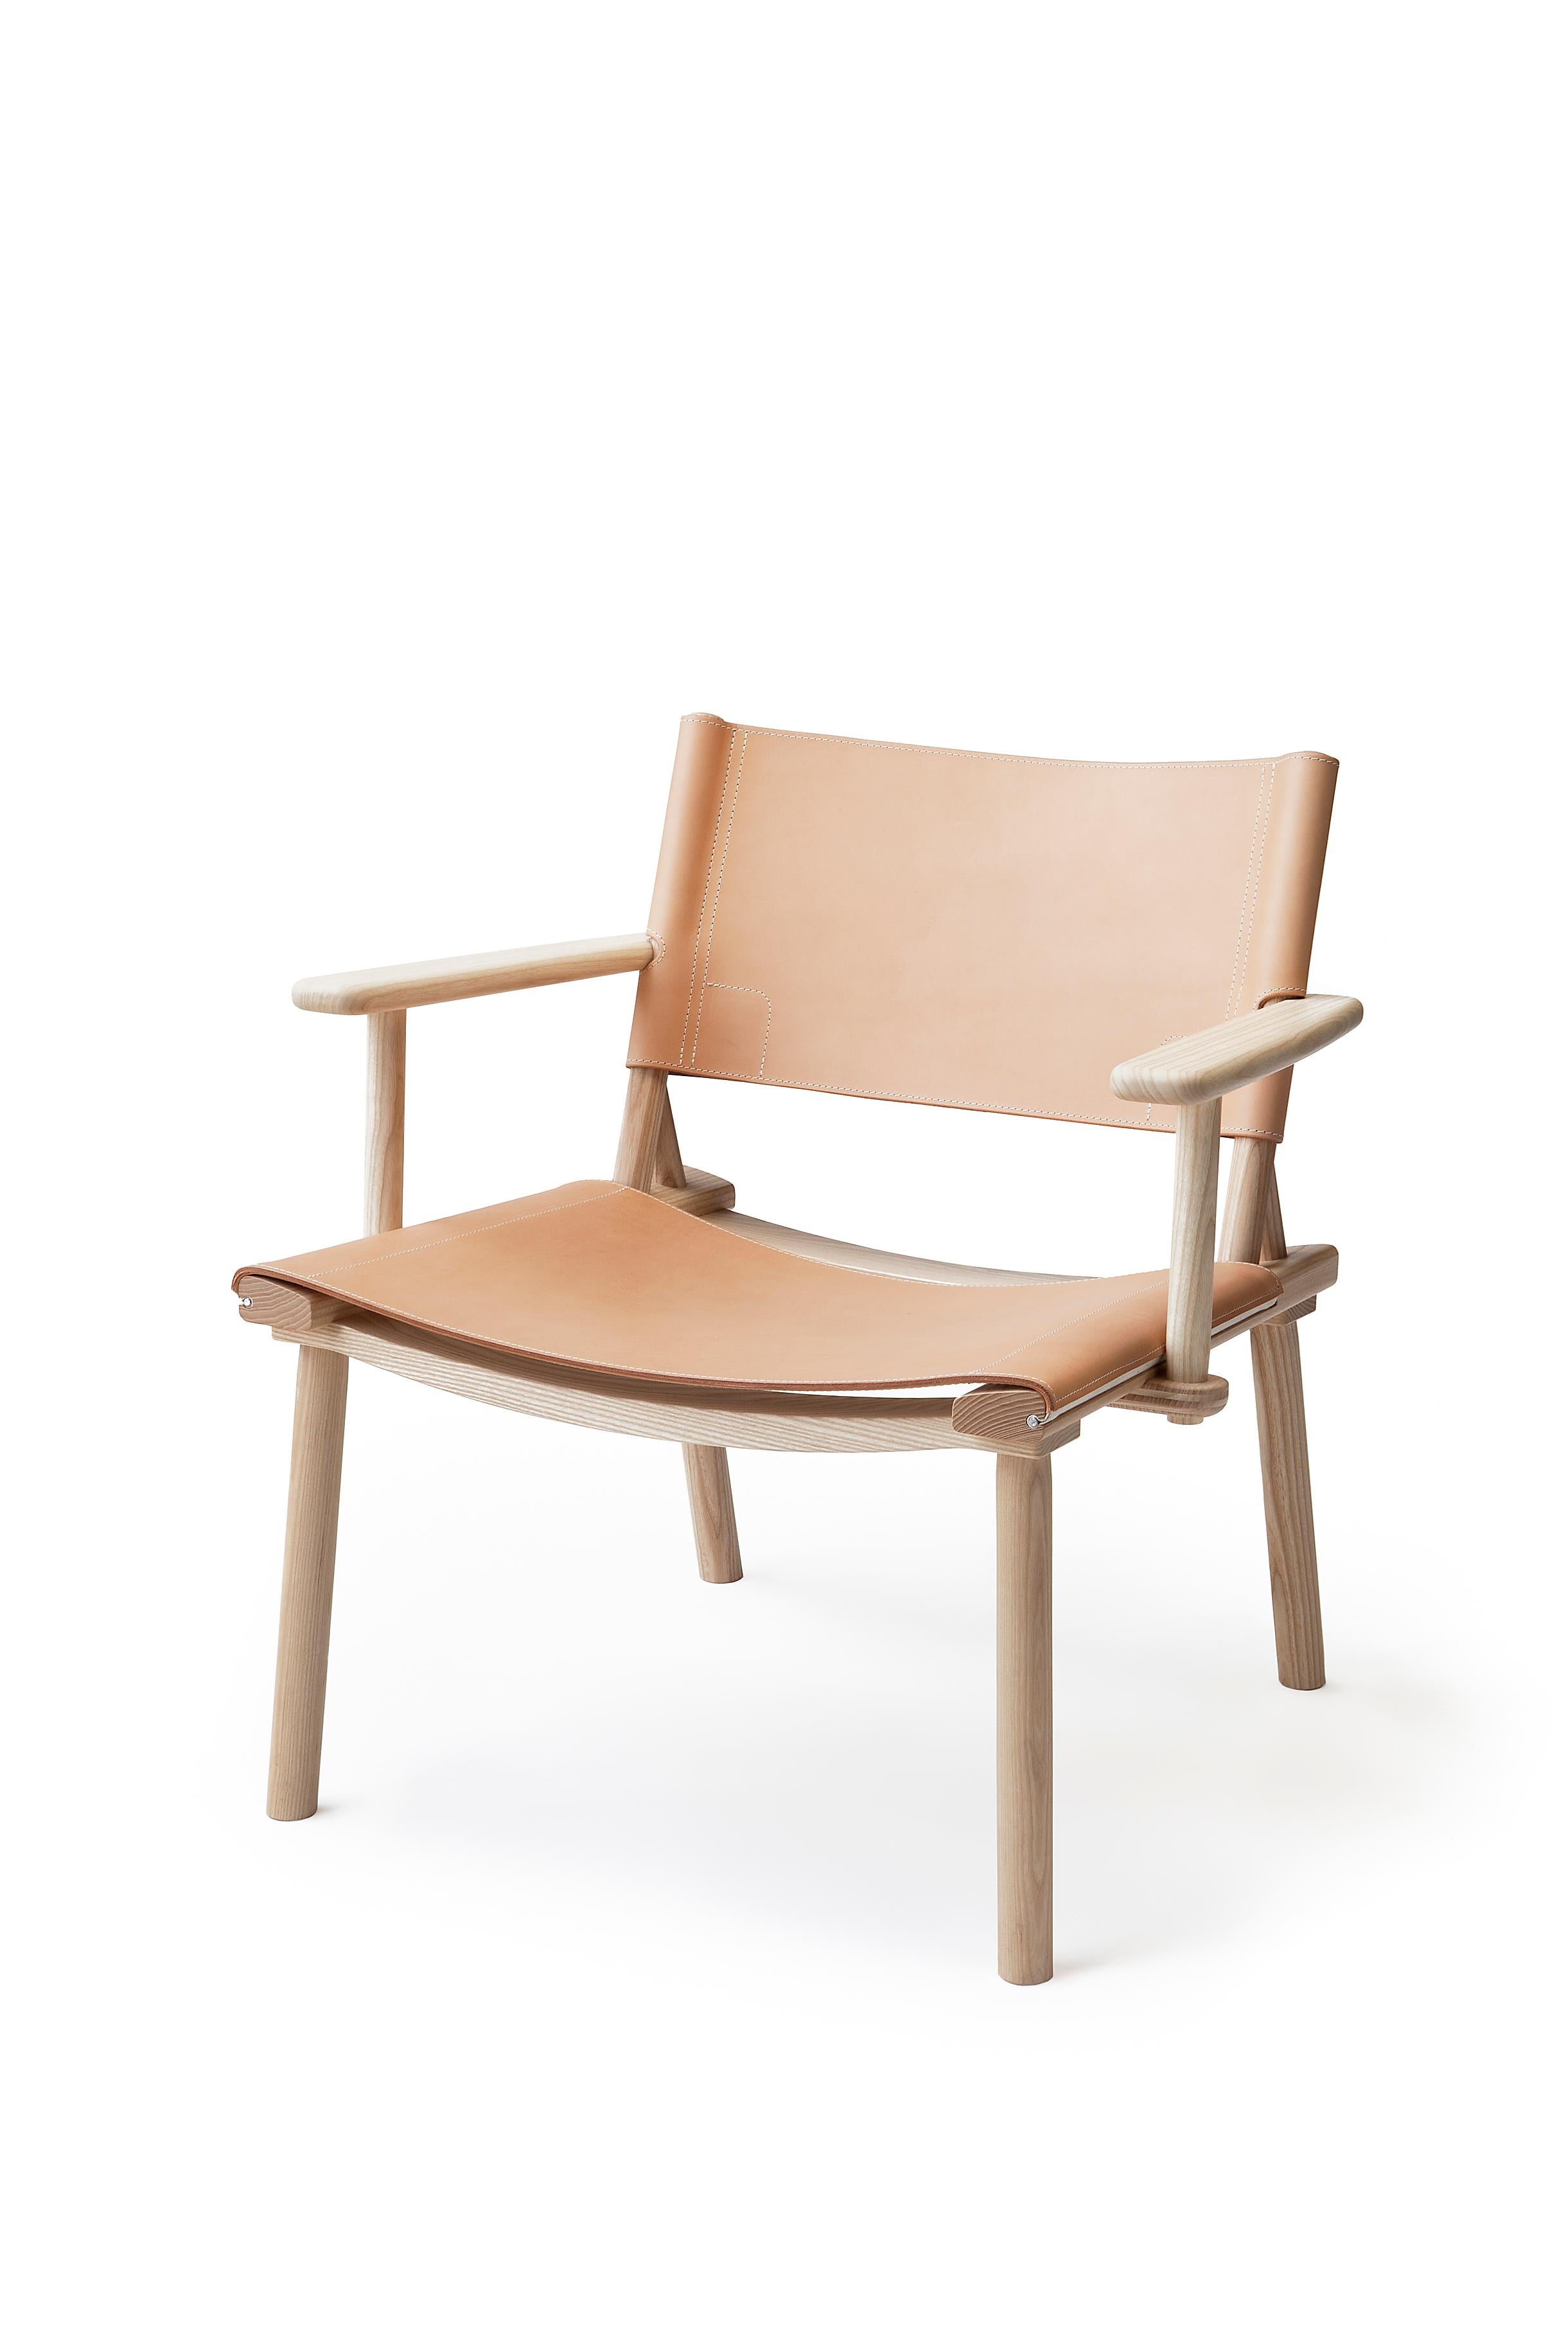 December lounge chair is designed by Jasper Morrison and Wataru Kumano in 2016. The chair is light and comfortable, and thanks to its simple Nordic design it suits both modern and traditional interiors. 

Frame options
Oak
Ash

Upholstery